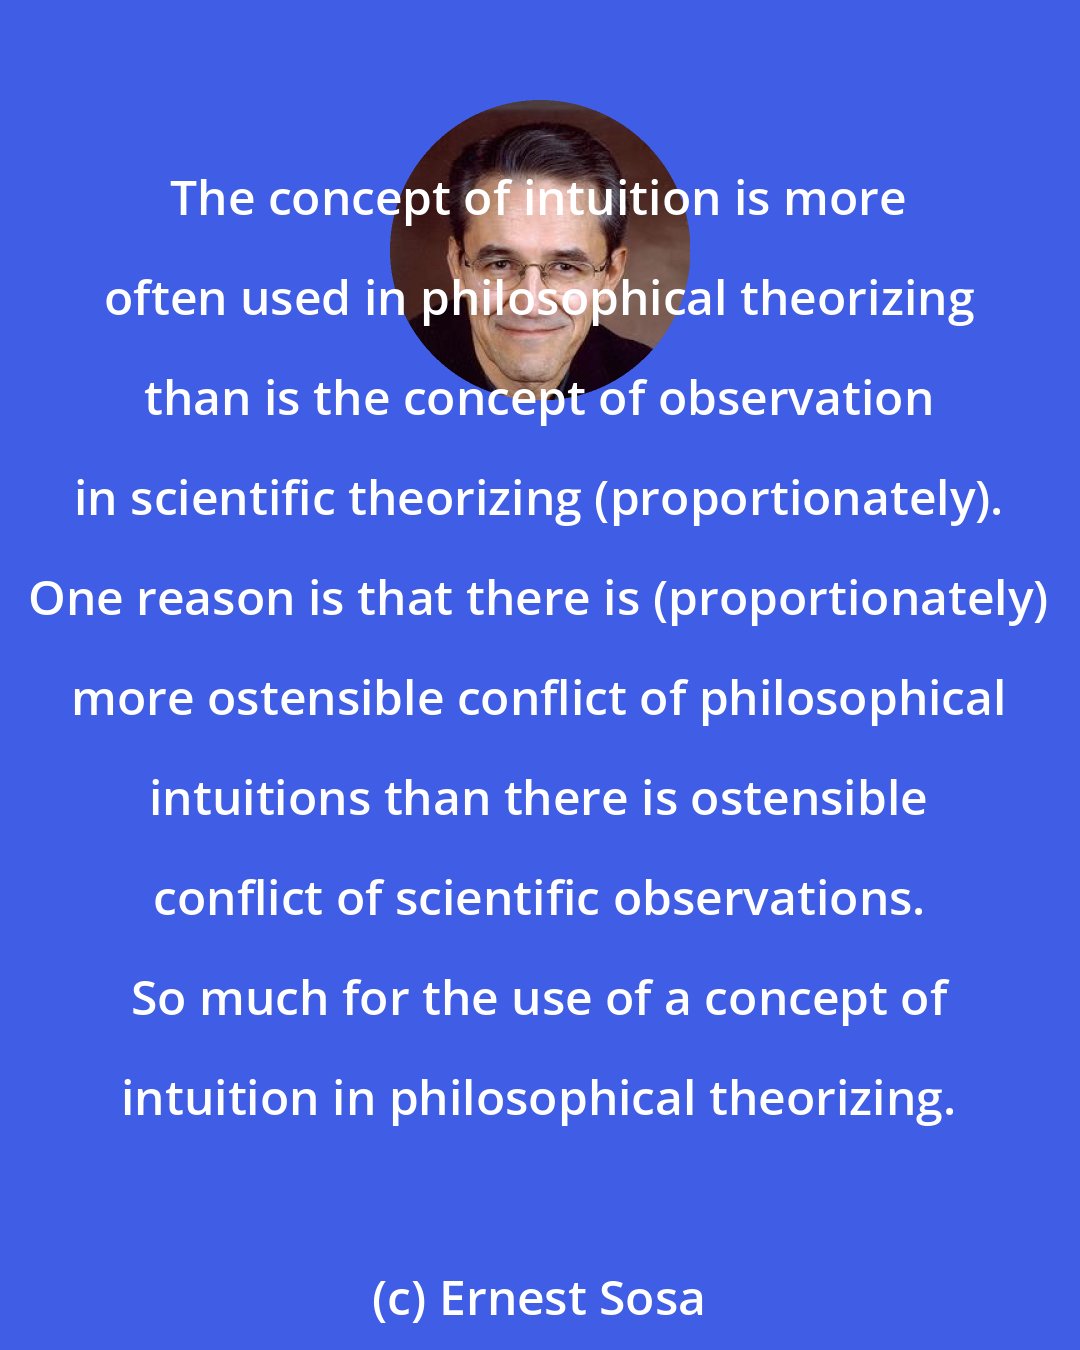 Ernest Sosa: The concept of intuition is more often used in philosophical theorizing than is the concept of observation in scientific theorizing (proportionately). One reason is that there is (proportionately) more ostensible conflict of philosophical intuitions than there is ostensible conflict of scientific observations. So much for the use of a concept of intuition in philosophical theorizing.